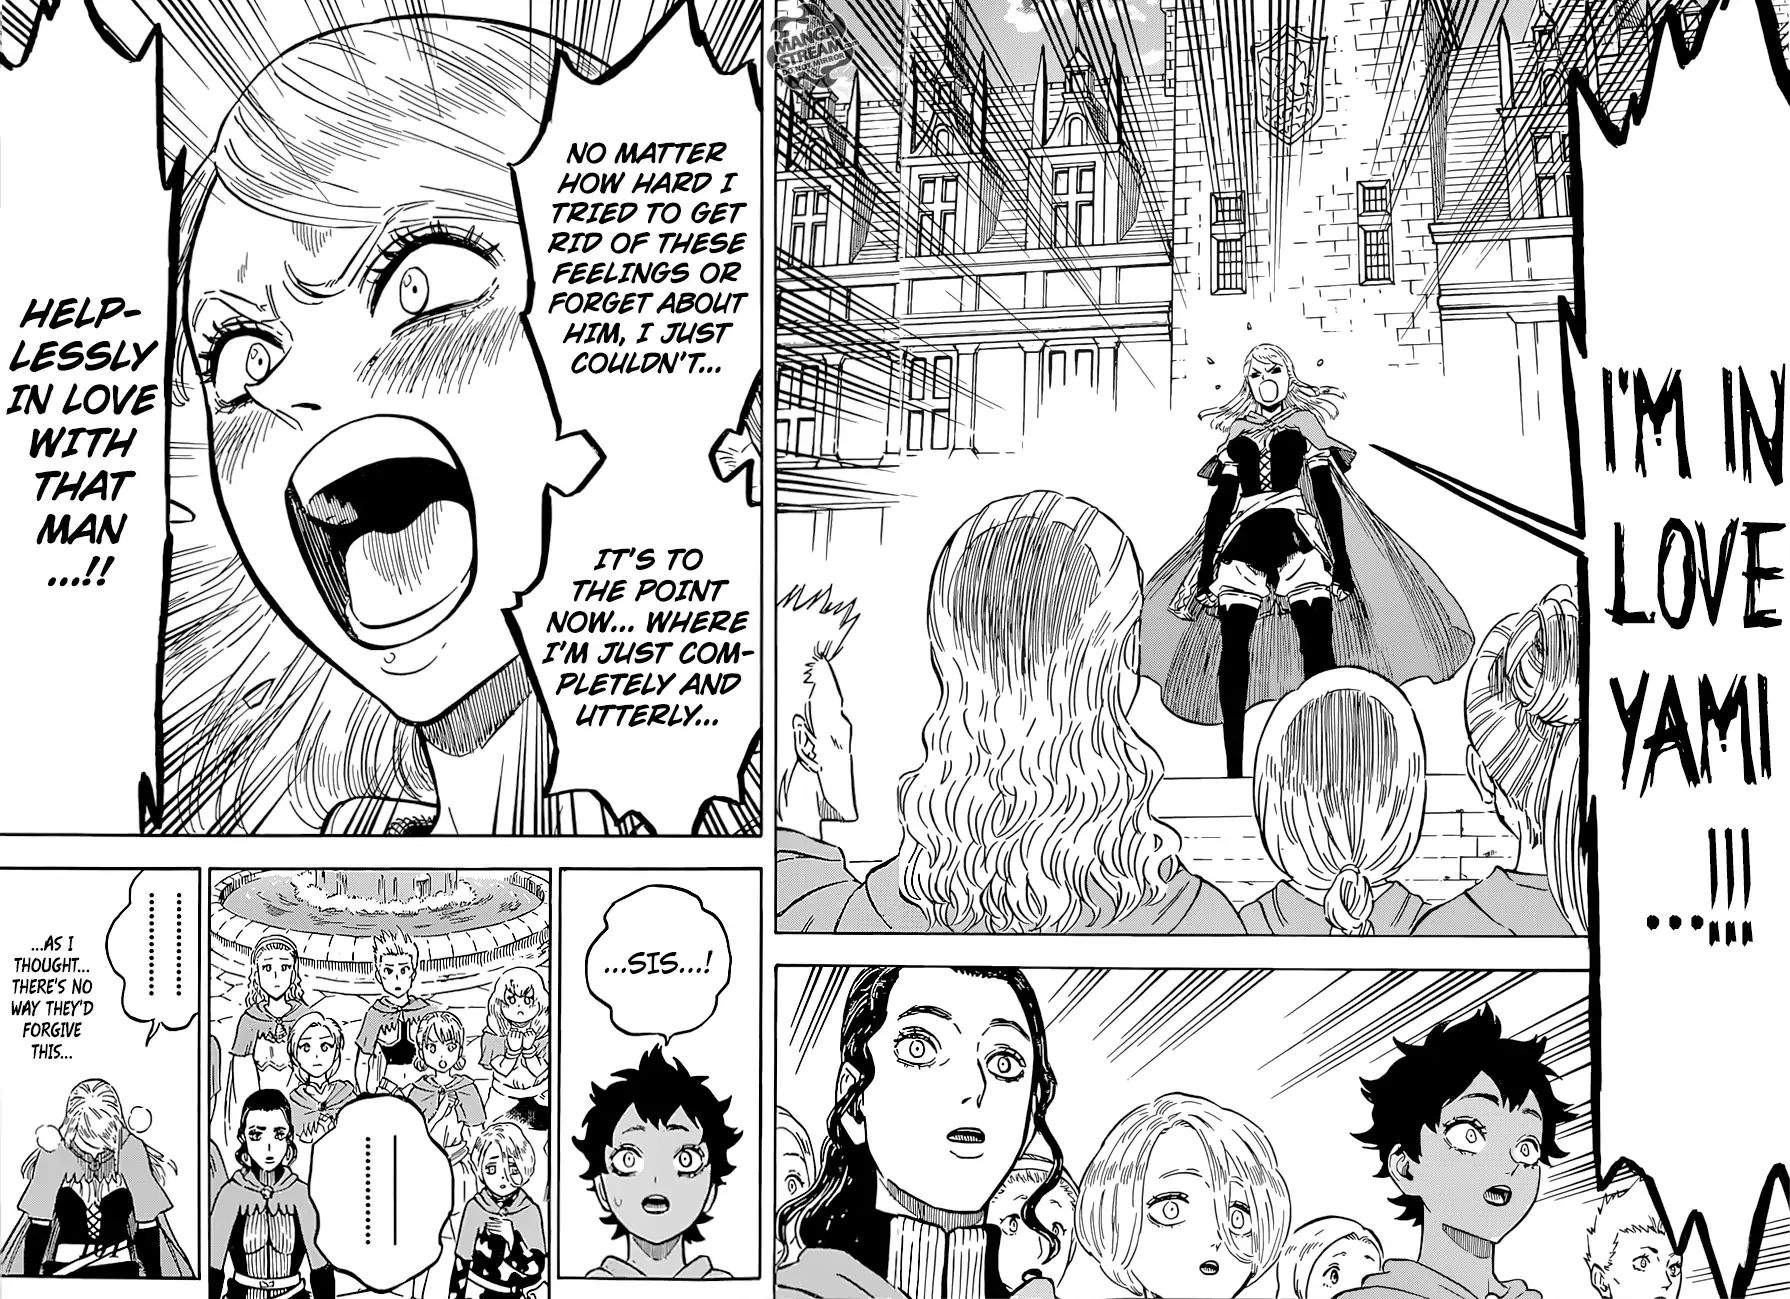 Black Clover, Chapter 221 The Rose